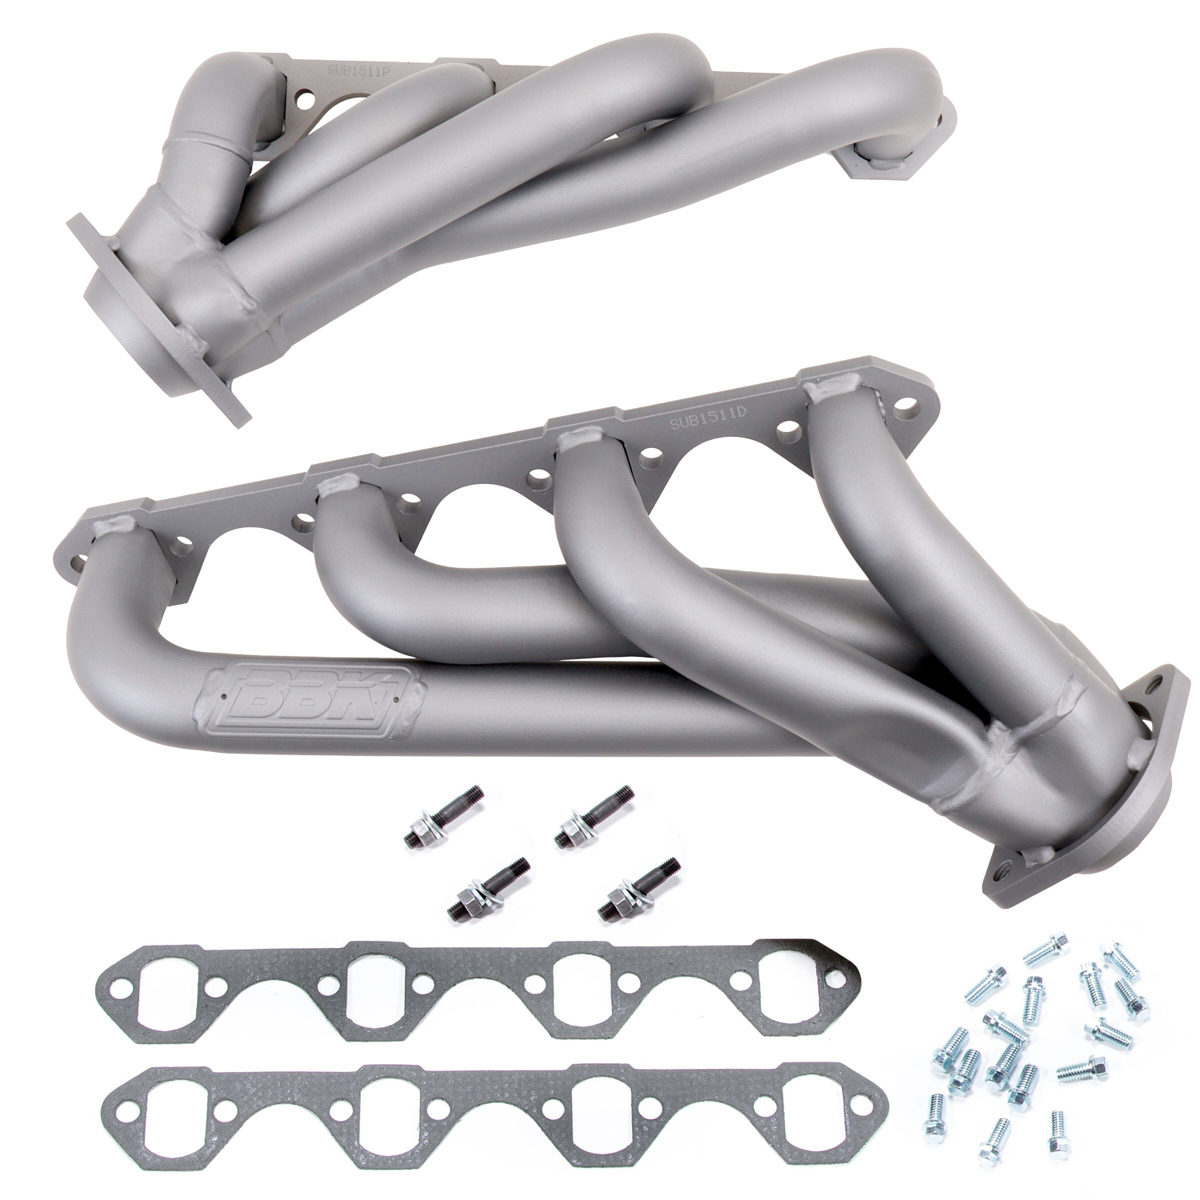 BBK Performance 1511 Headers, Swap Shorty, 1-5/8 in Primary, 2-1/2 in Ball Flange, Steel, Titanium Ceramic, Small Block Ford, Ford Mustang 1979-93, Pair